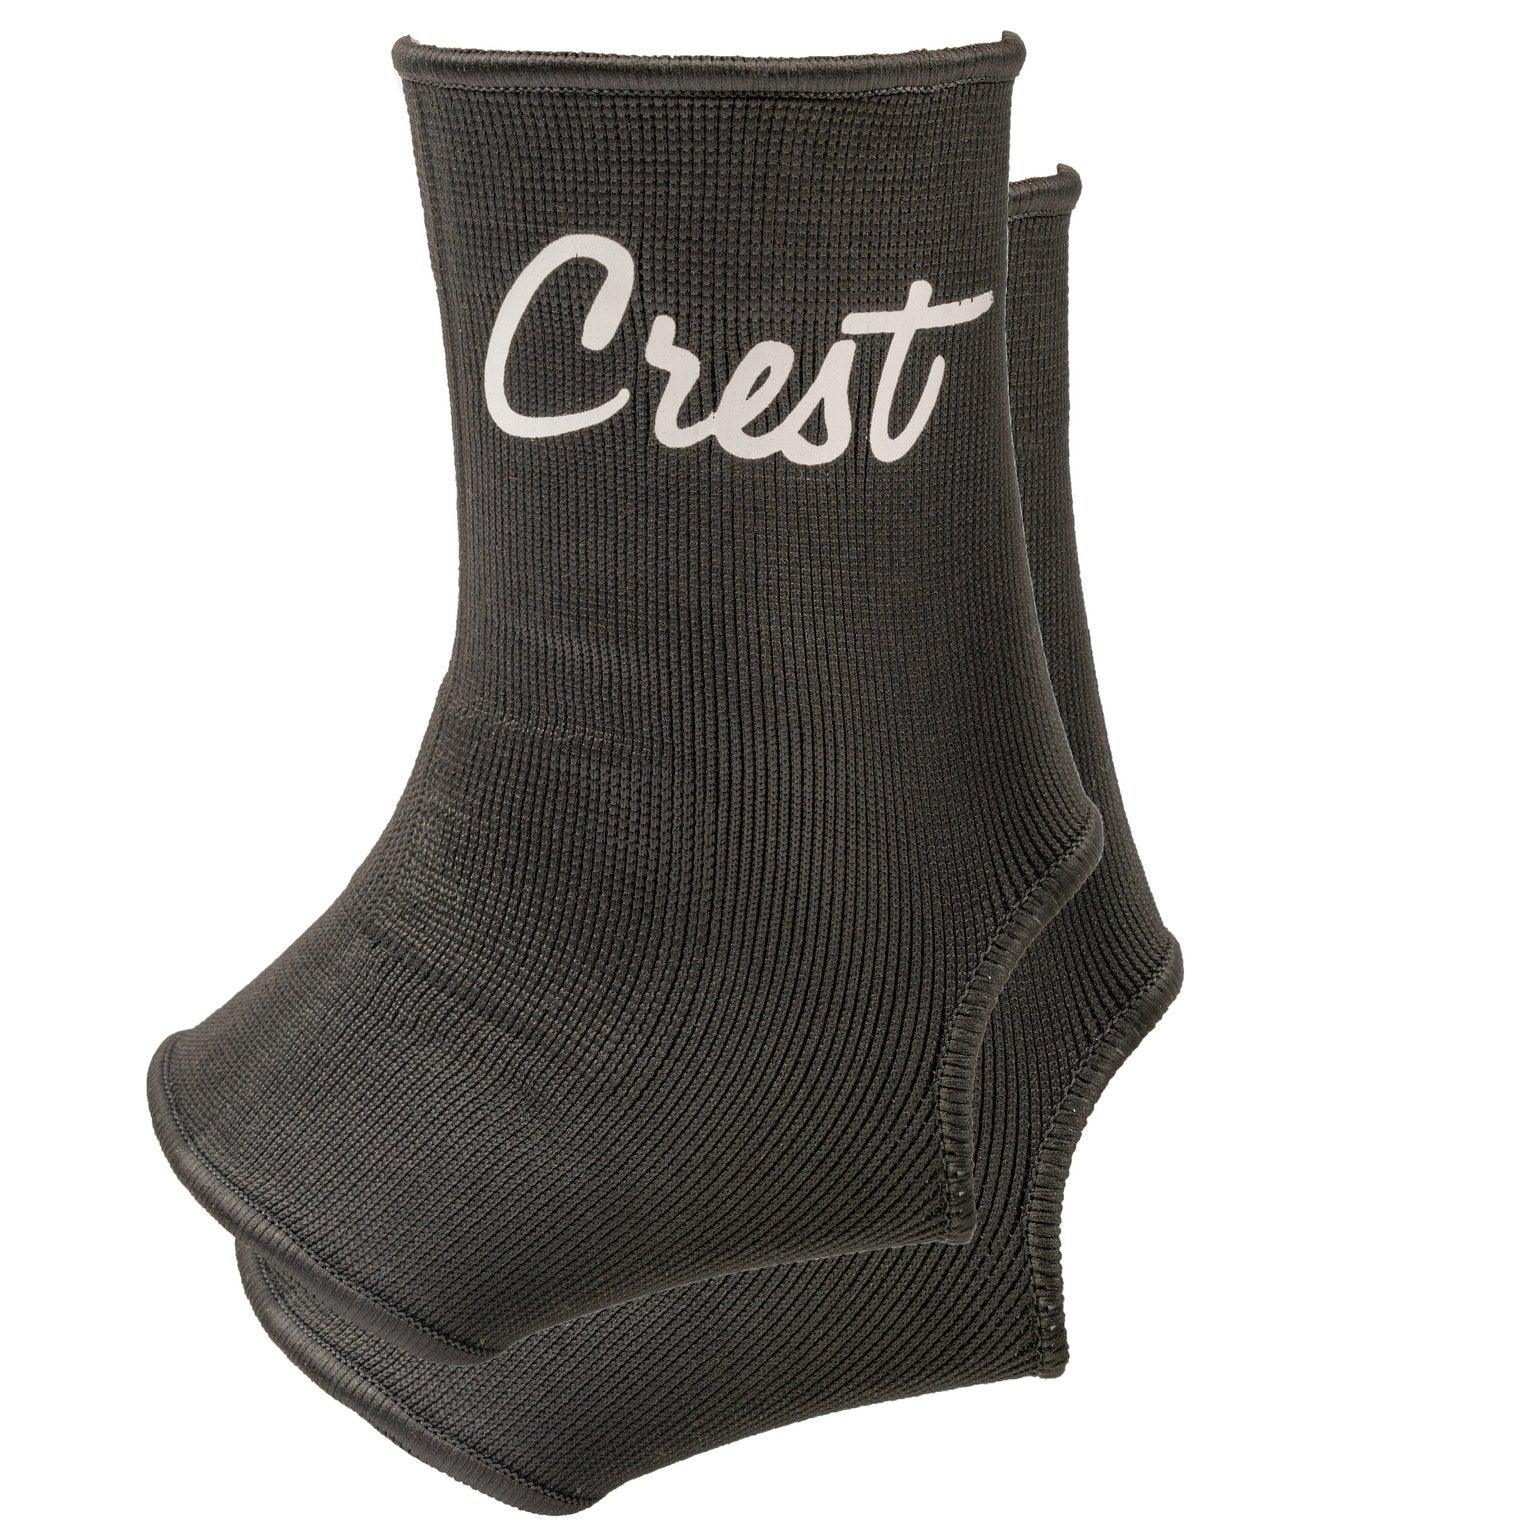 Ankle support - Crest - PFG